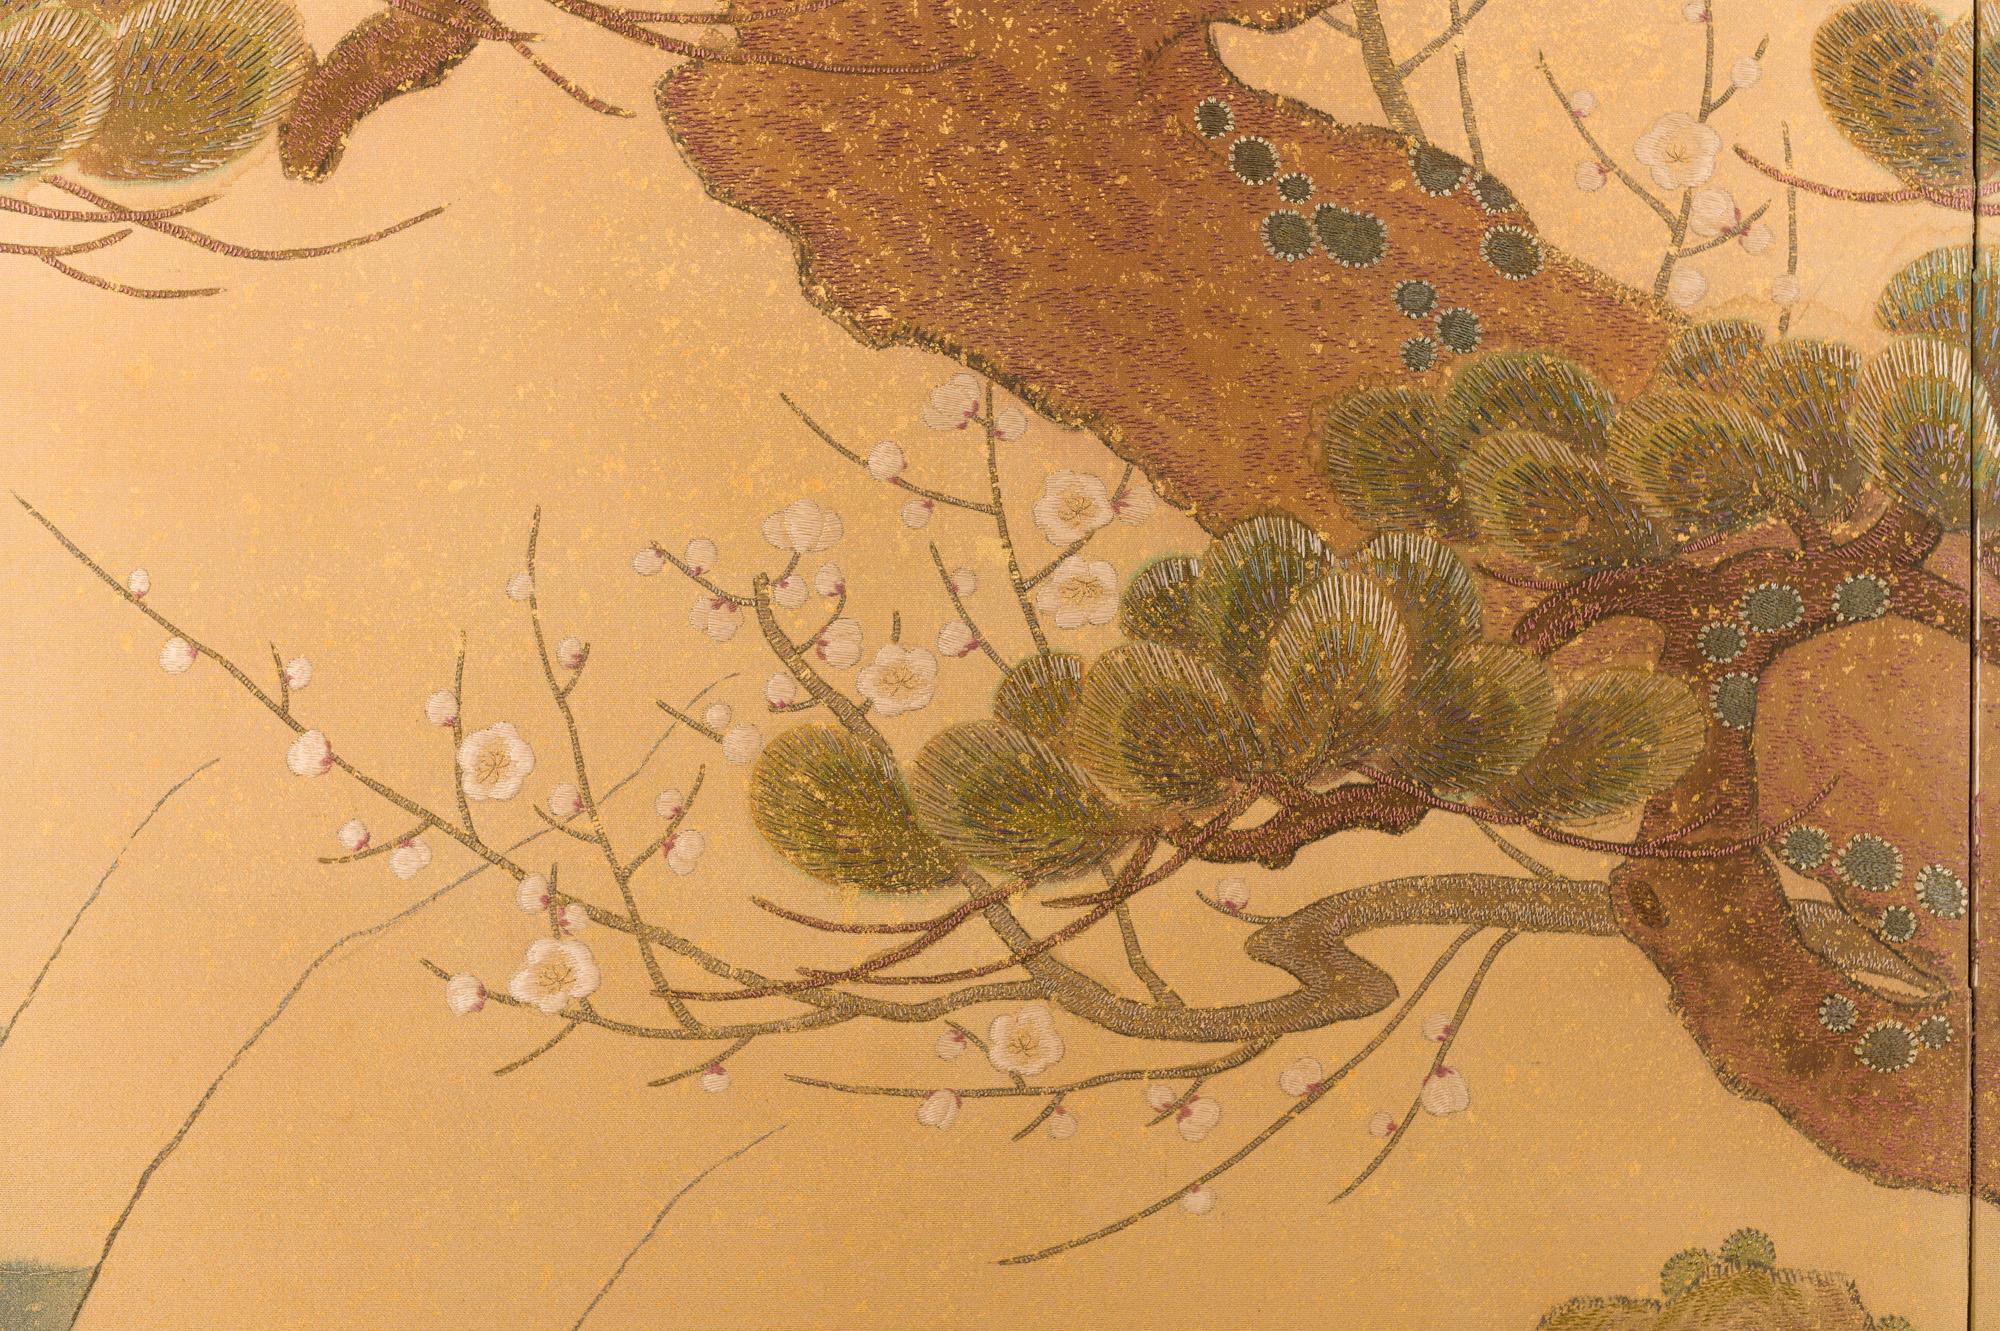 Showa Japanese Two-Panel Screen, Embroidered Pine at Water's Edge